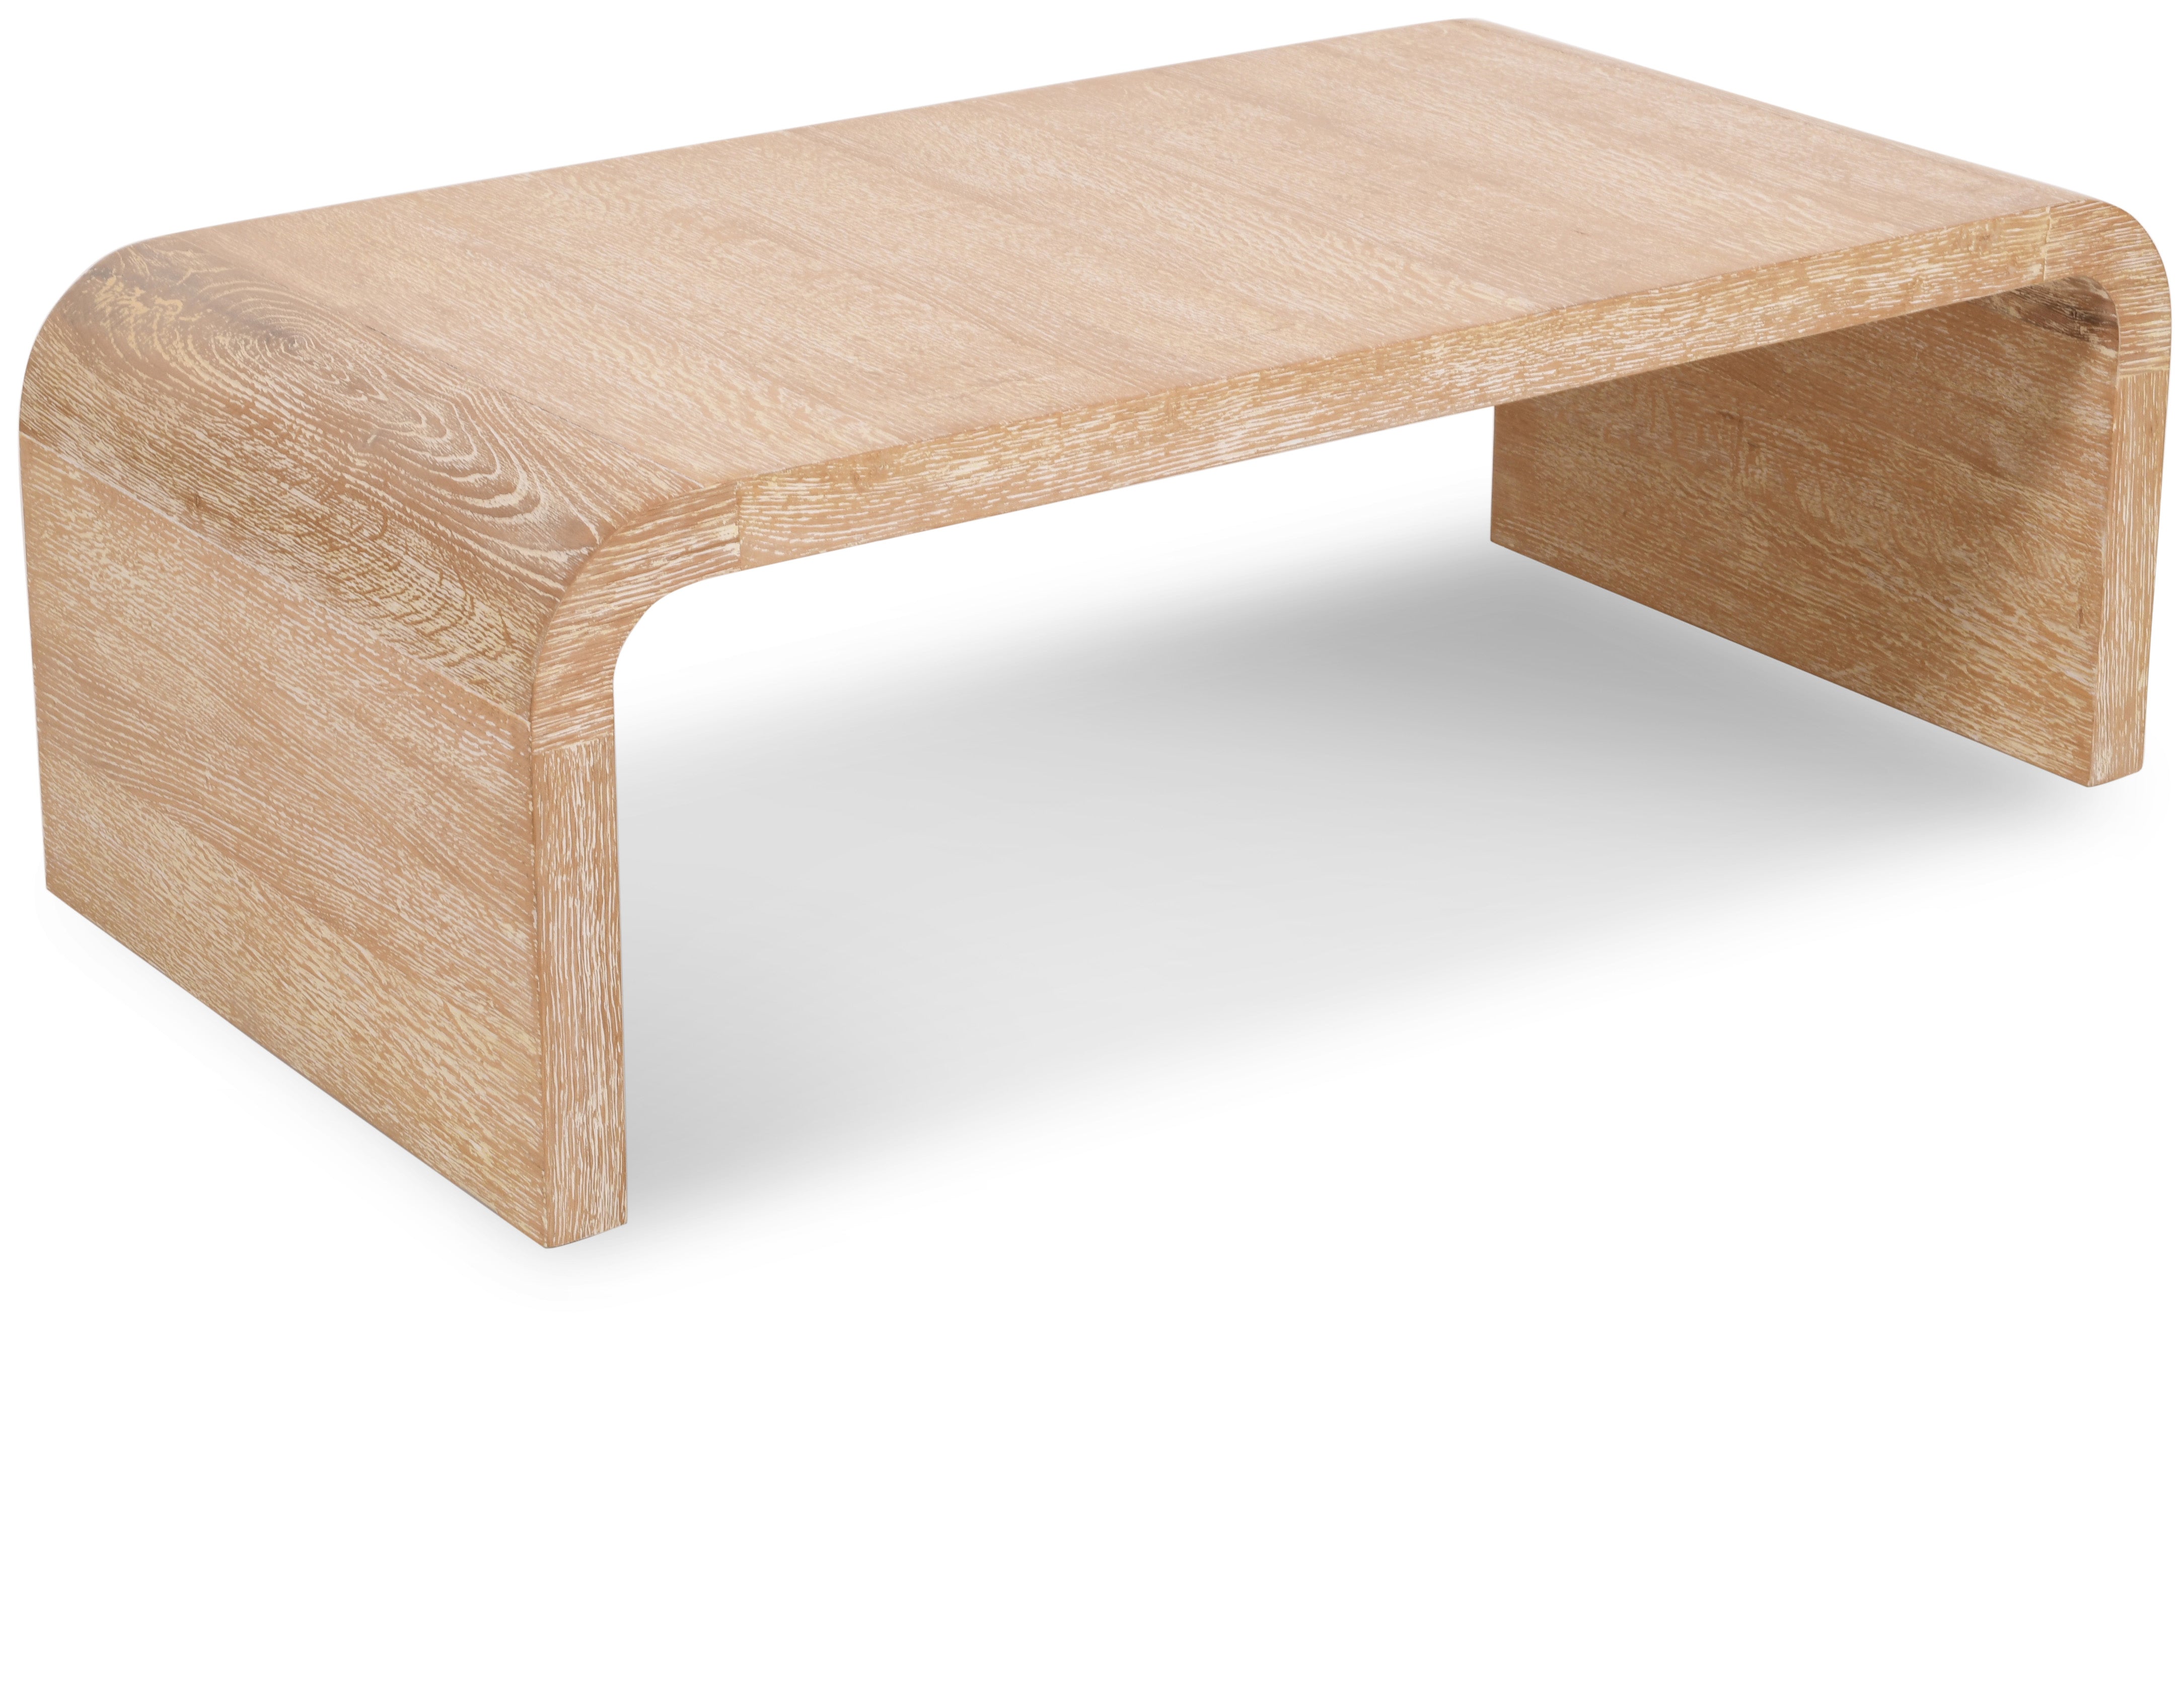 Cresthill Coffee Table - White Oak